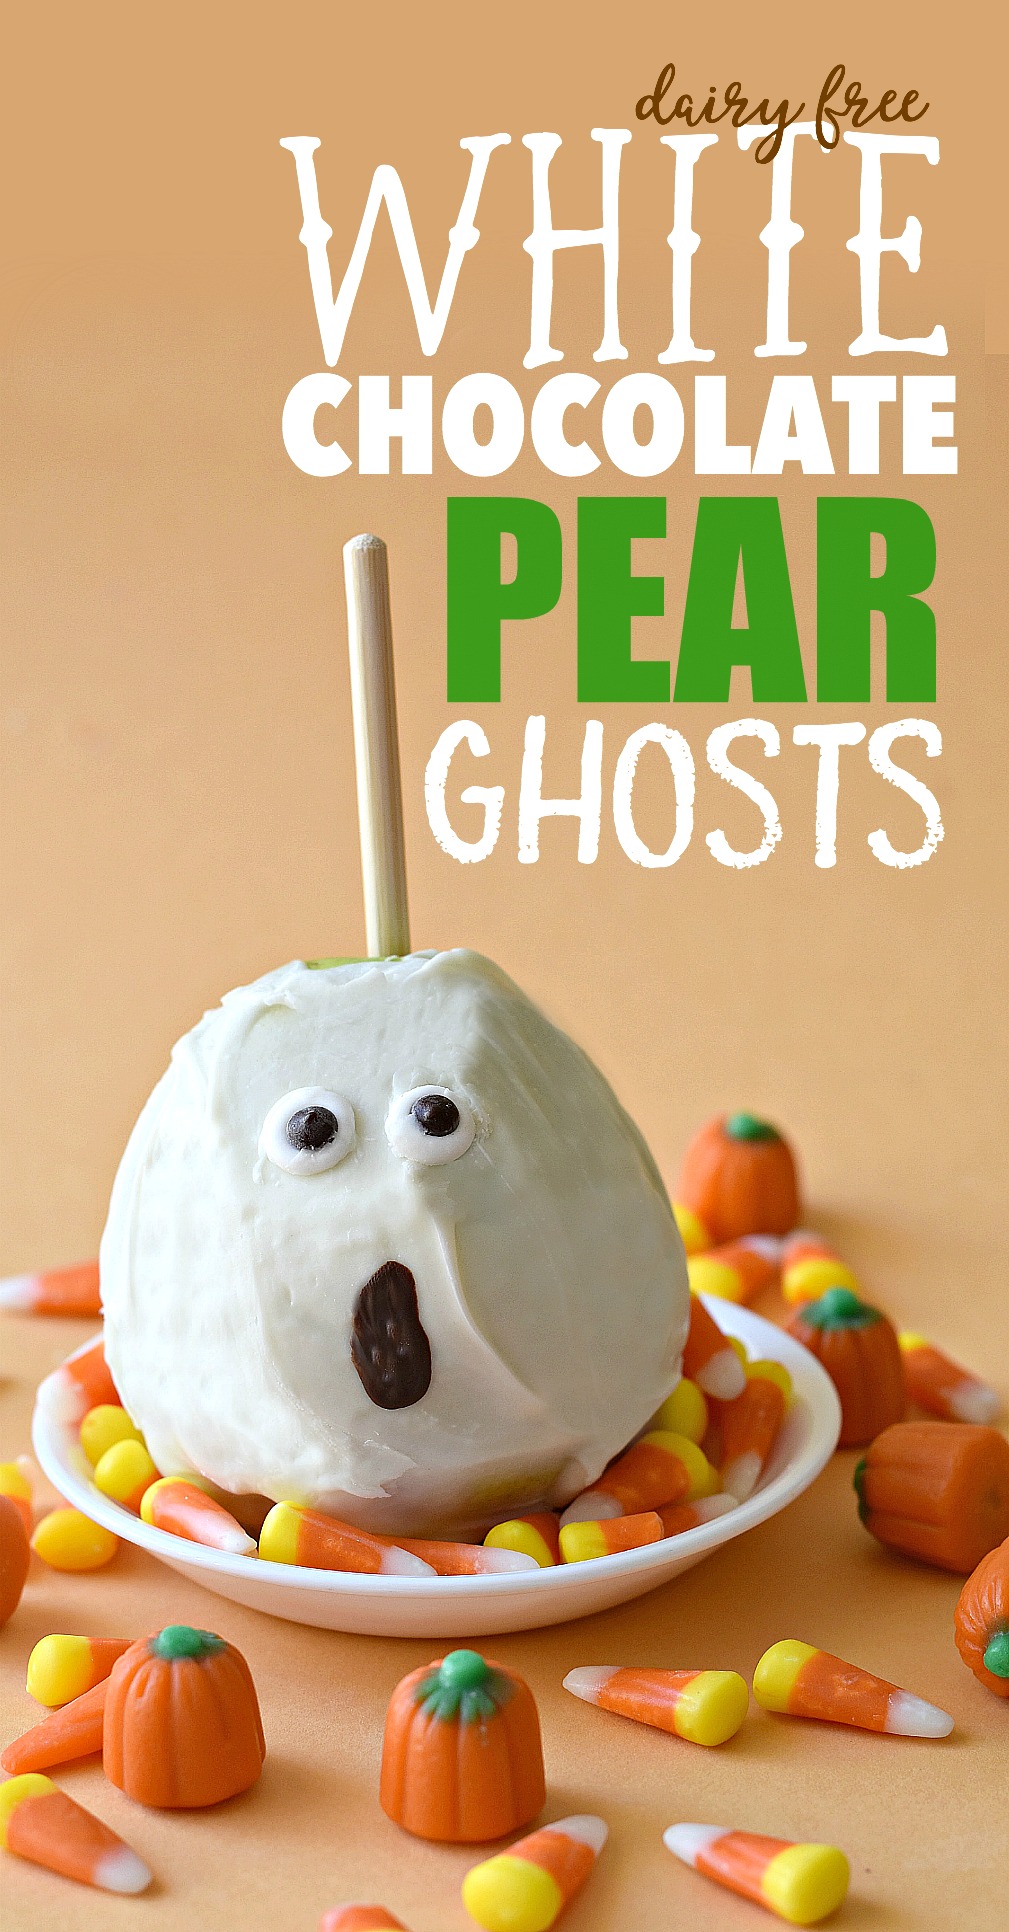 Put a new twist on the old classic caramel apple by turning apples into pears with these frightfully delicious Dairy Free White Chocolate Pear Ghosts.